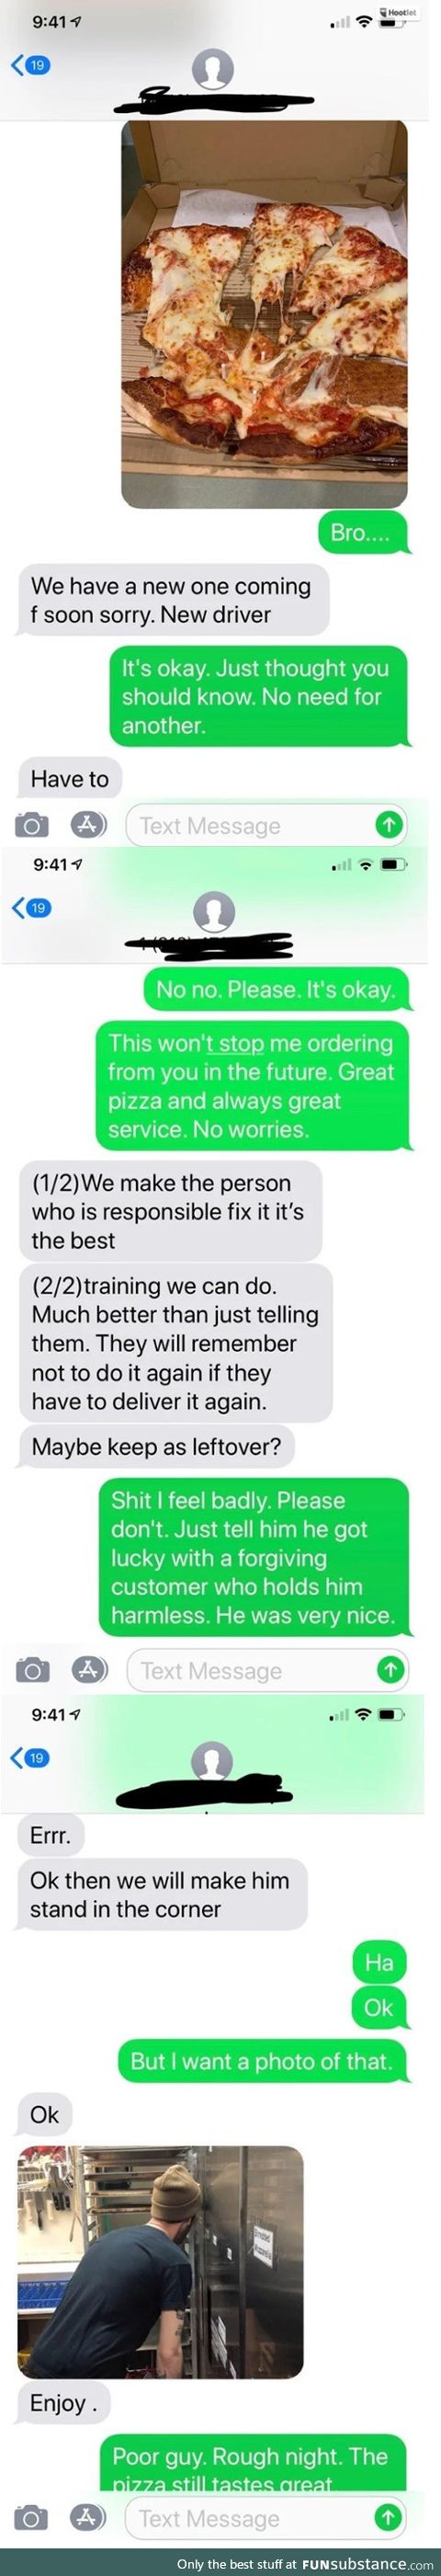 Pizza guy botches a delivery